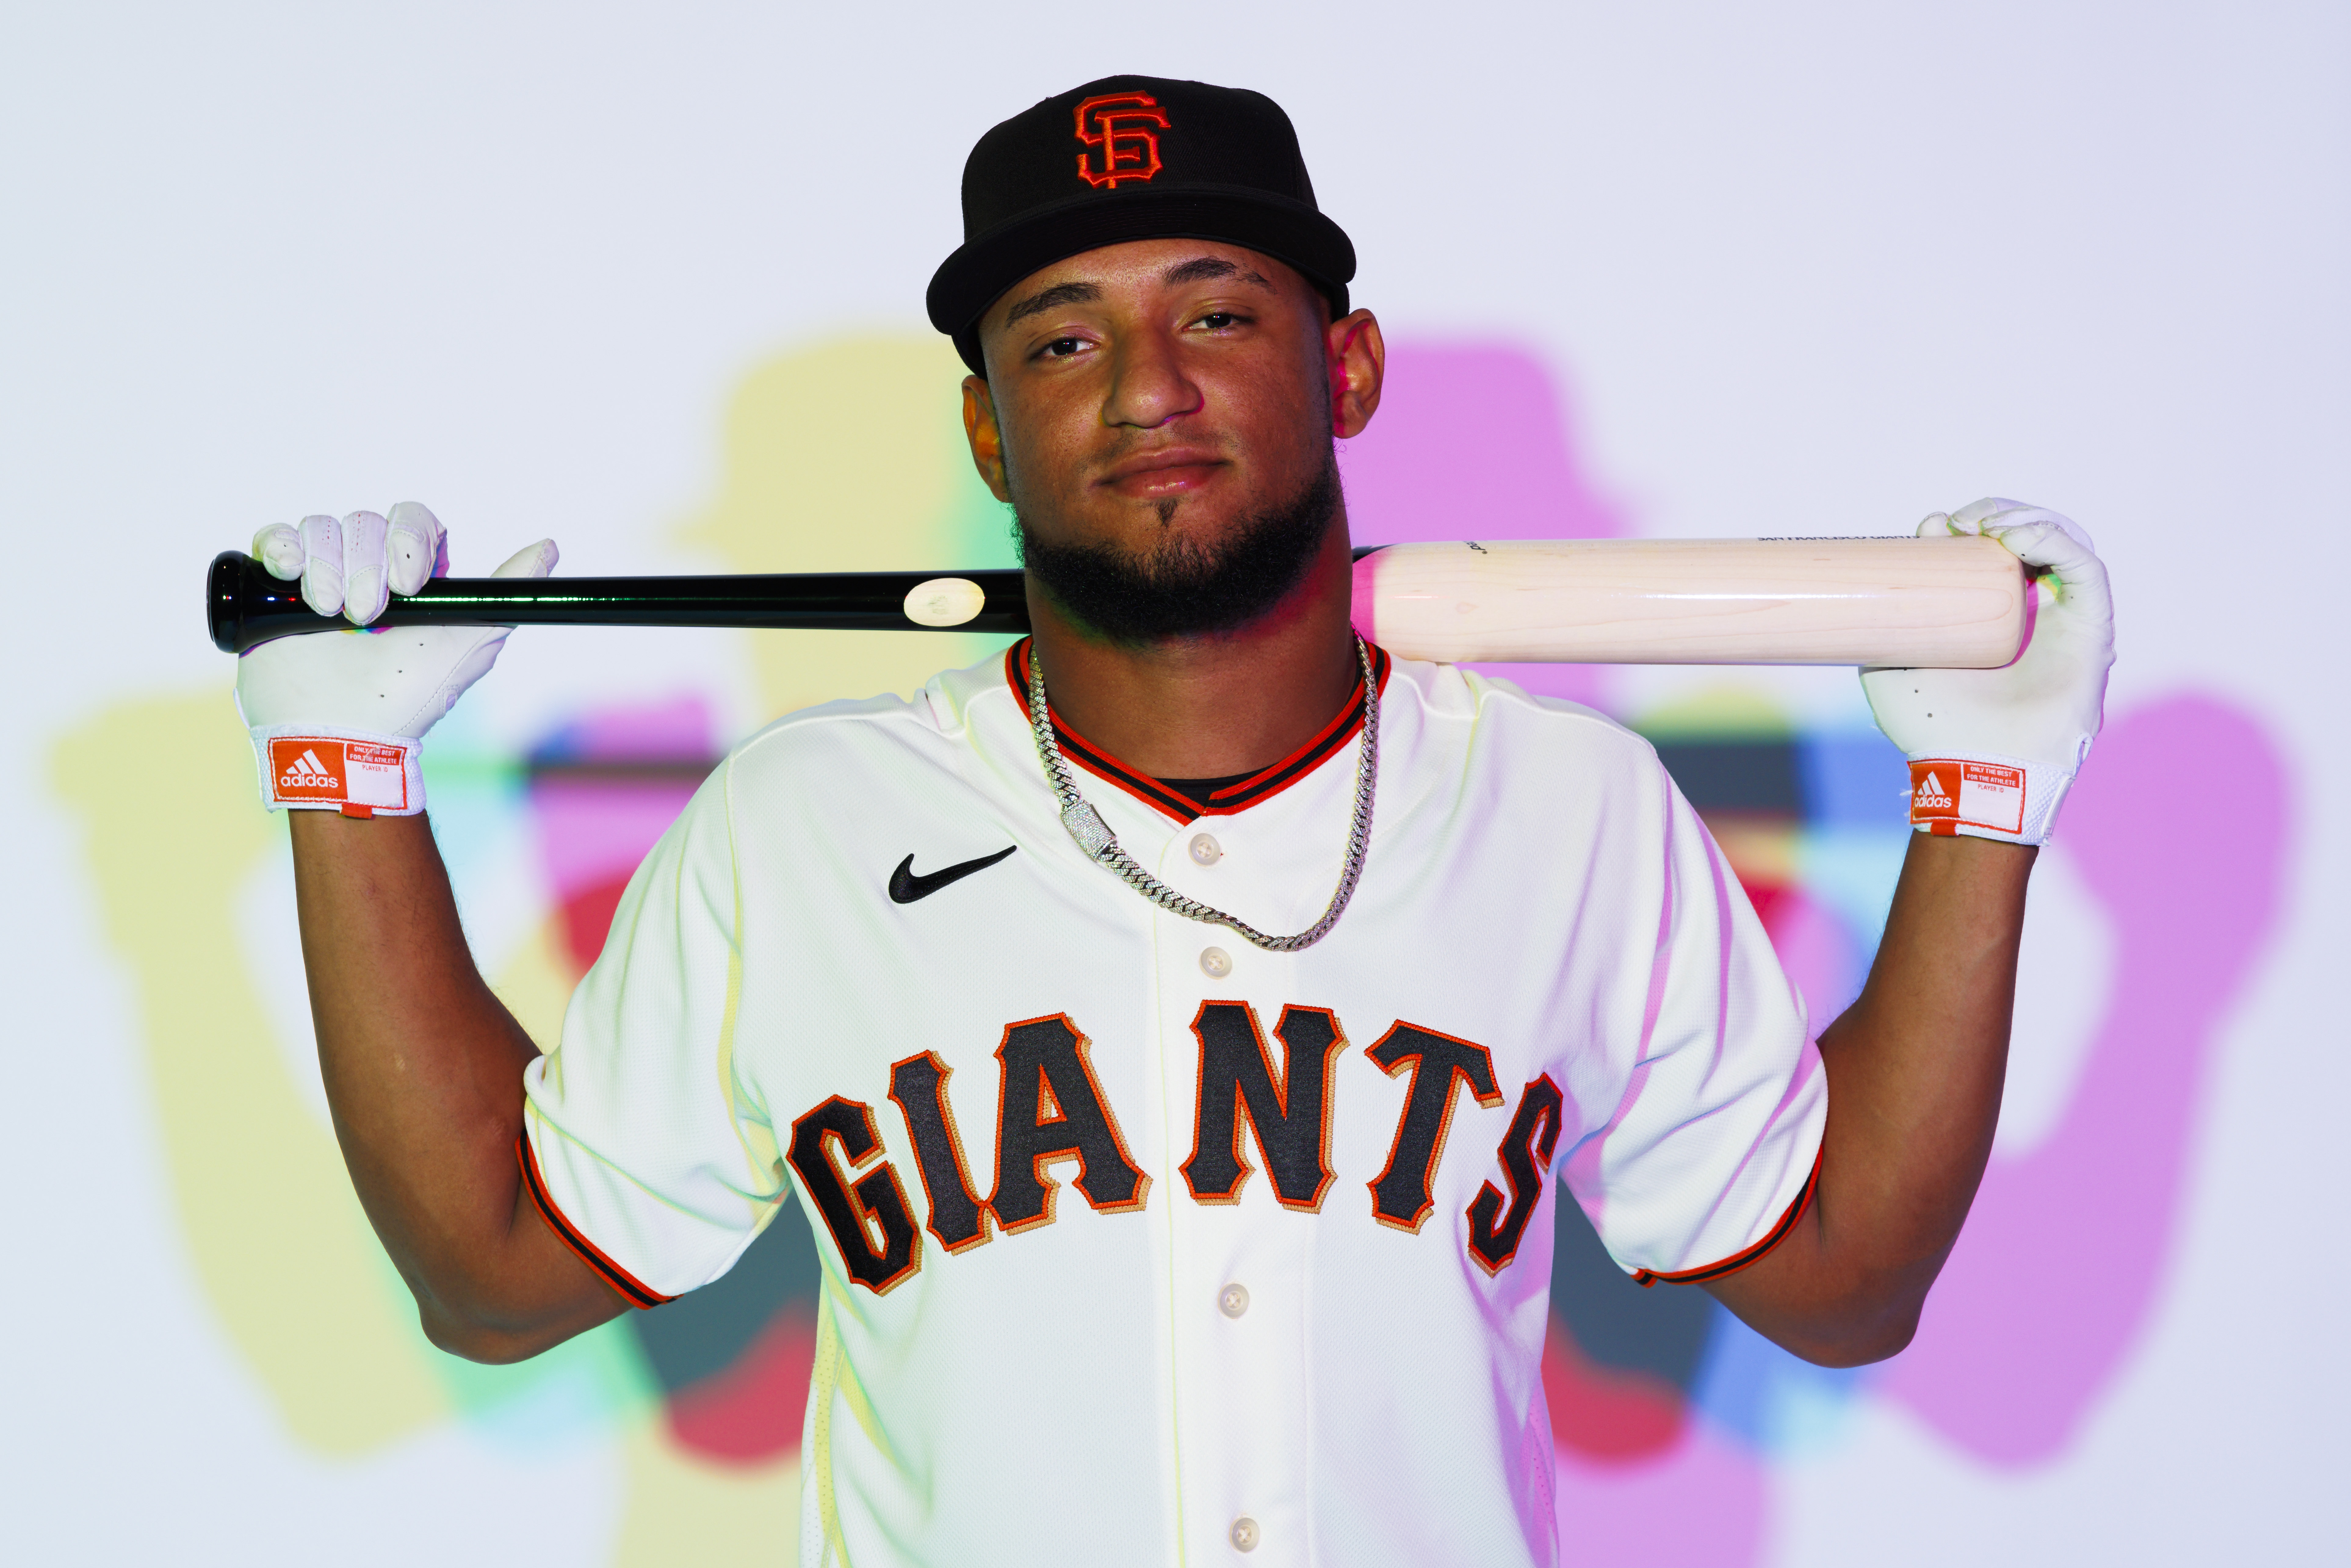 Luis Matos with the bat over his shoulders, posing in front of pastel colors at Giants media day.